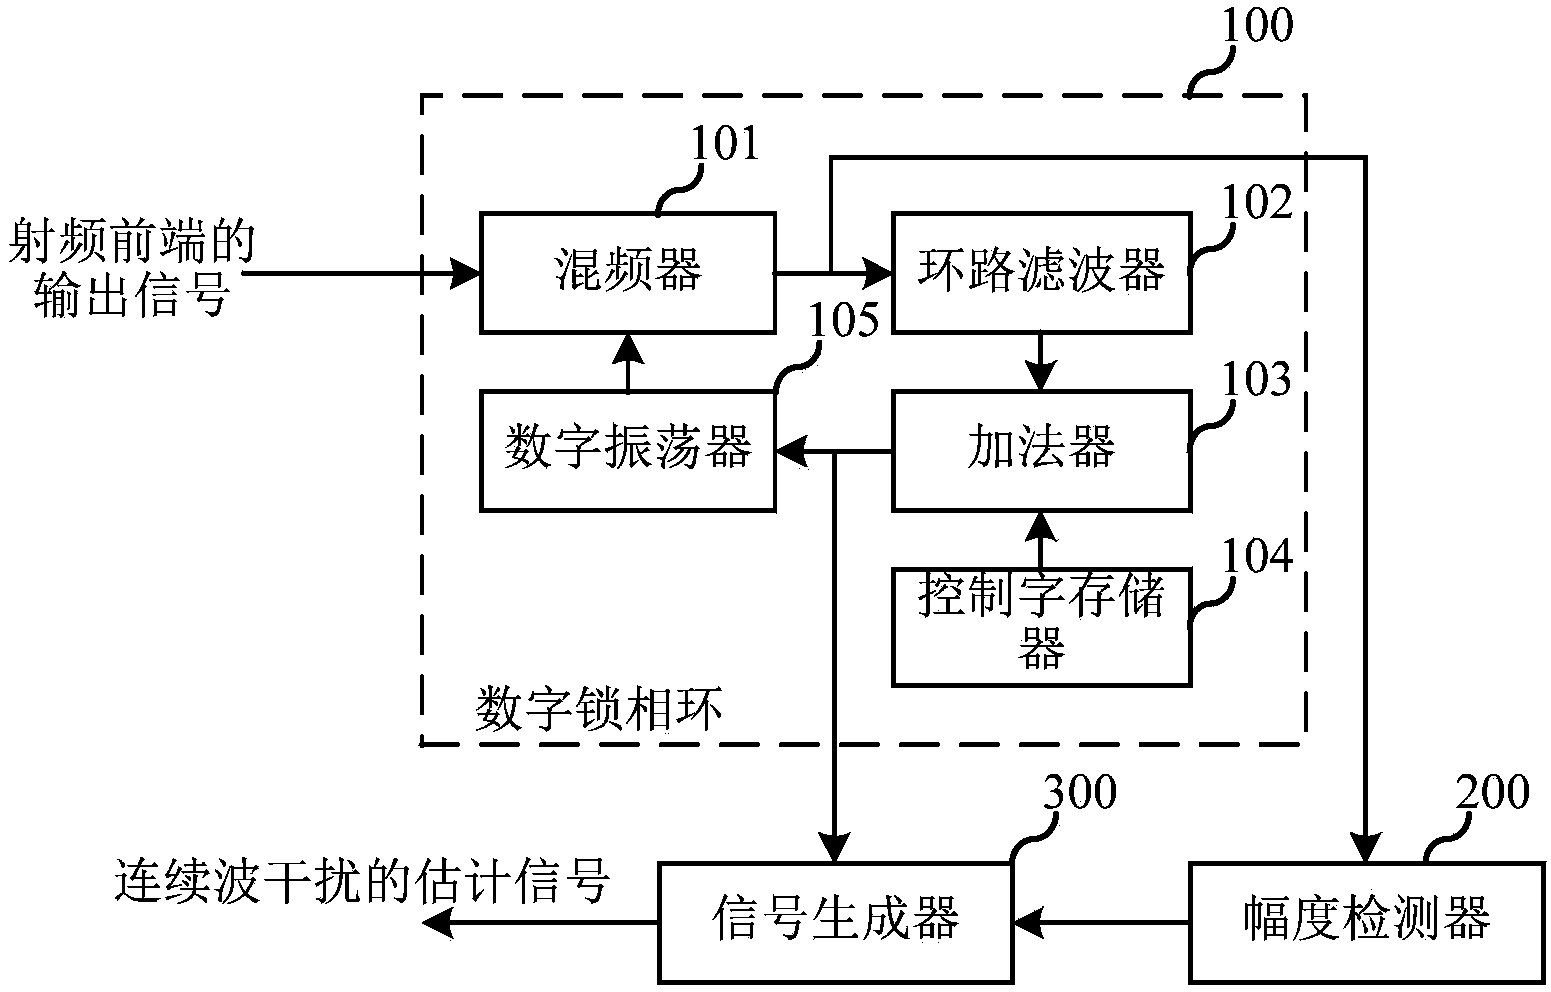 Continuous wave interference signal estimator, estimation method, remover and removing method